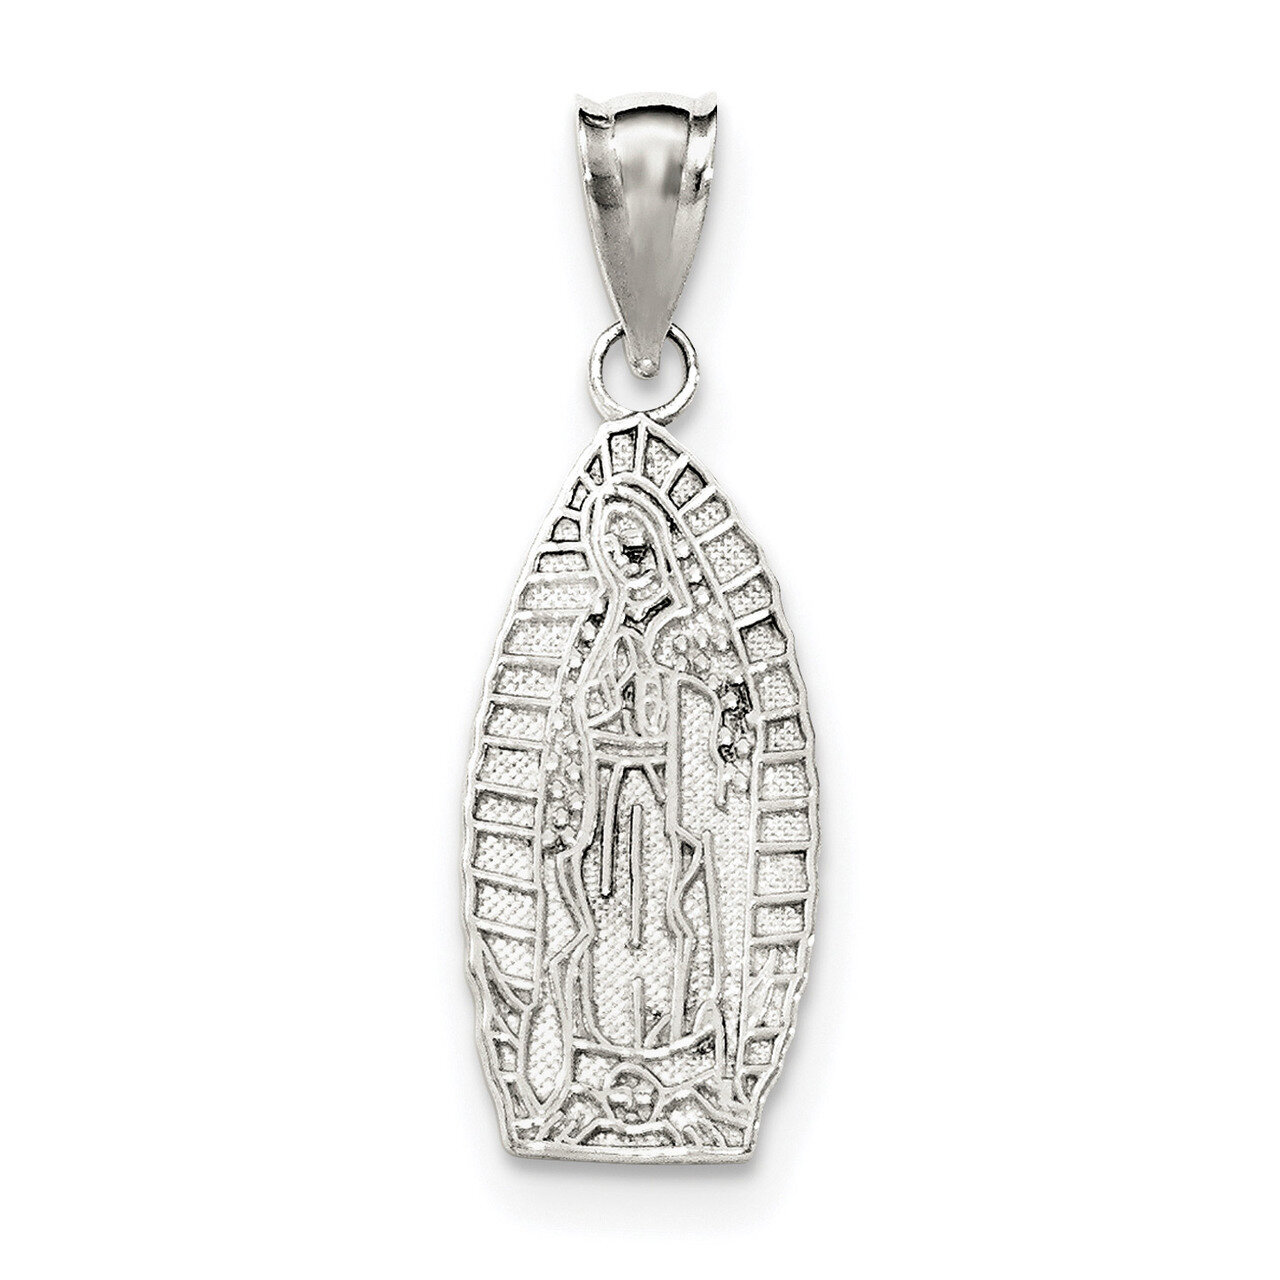 Religious Teardrop Pendant Sterling Silver Polished QC8368